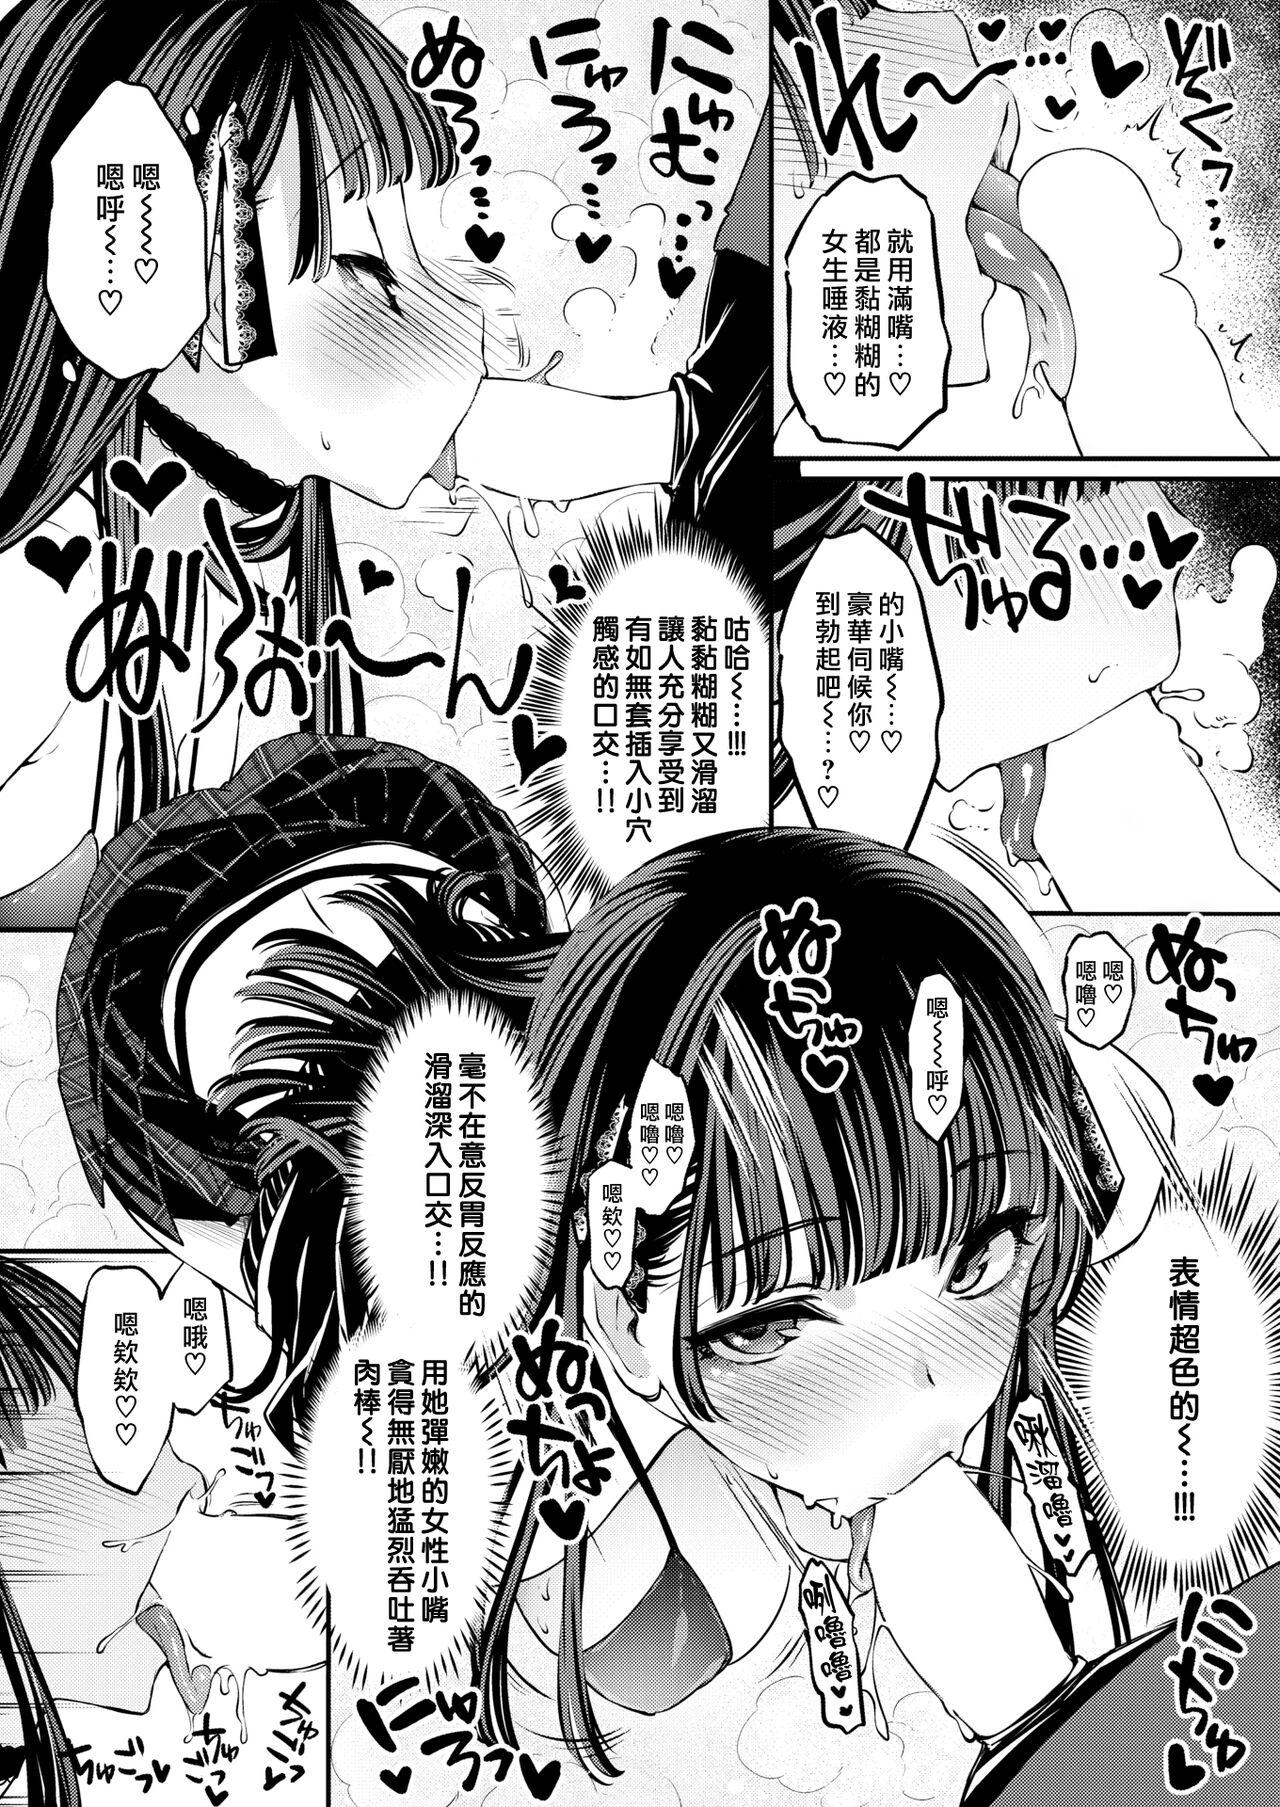 Whooty H Shitaino How much!! | 想色色的價碼!! Pounding - Page 2